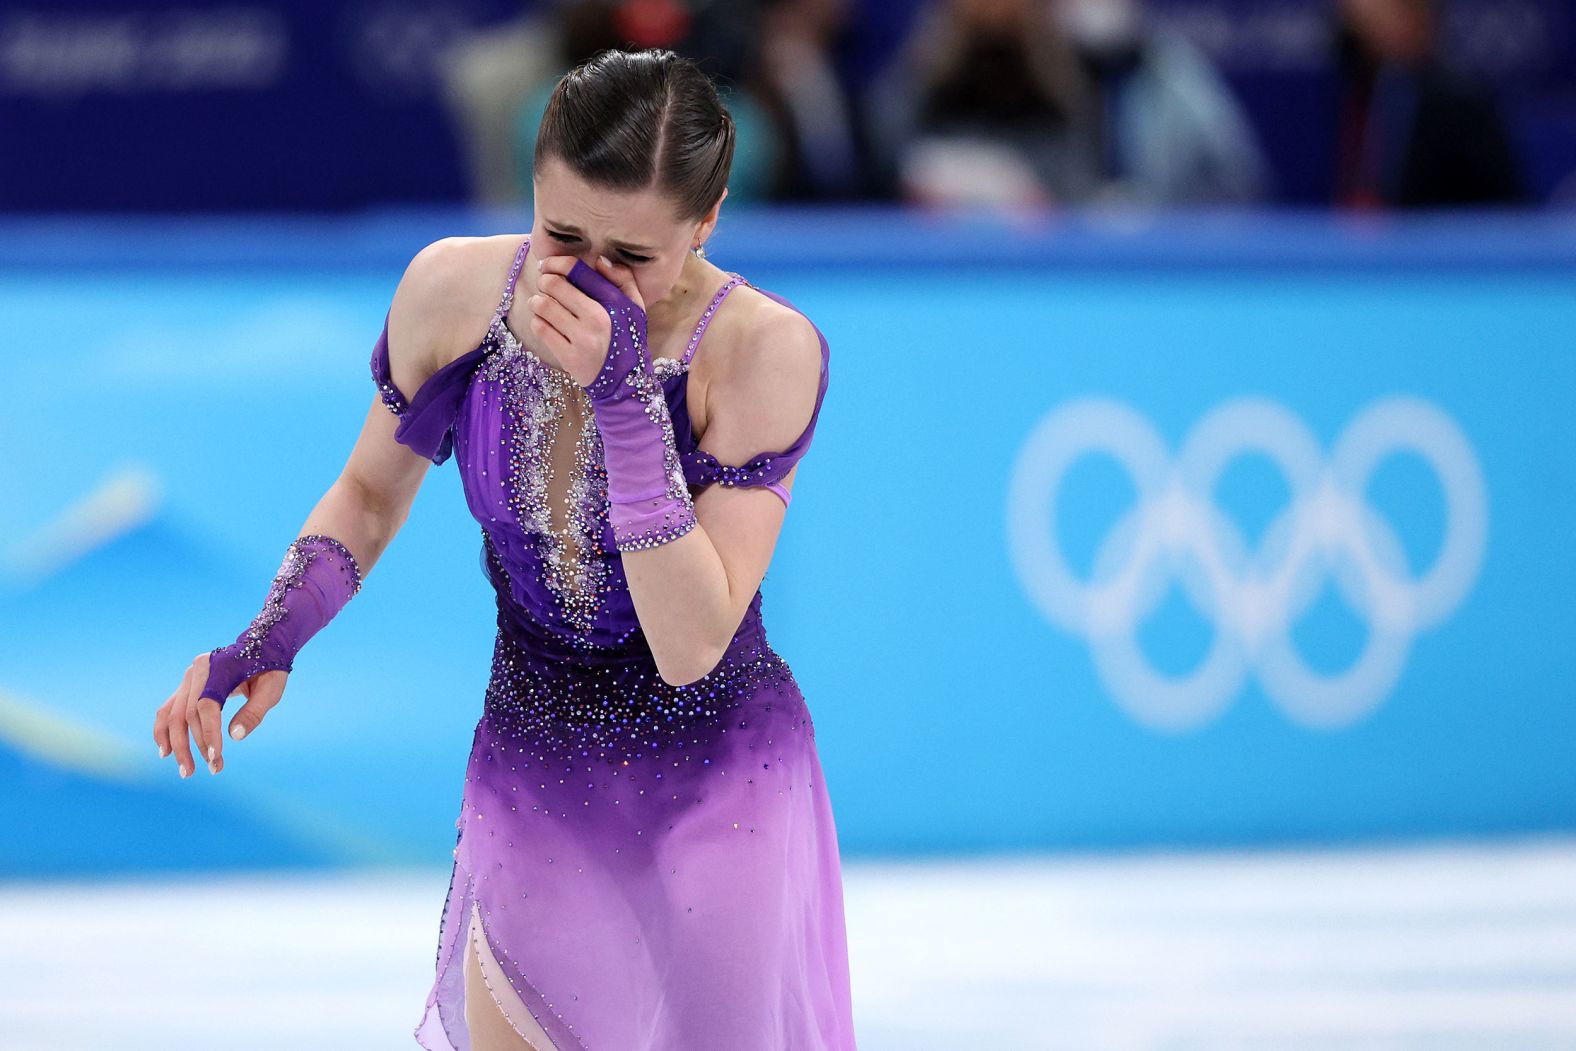 As soon as she finished her short program, Valieva <a href="index.php?page=&url=https%3A%2F%2Fwww.cnn.com%2Fworld%2Flive-news%2Fbeijing-winter-olympics-02-16-22-spt%2Fh_a758629c8f665c39bad5faaee1aac6e0" target="_blank">broke into tears.</a> The crowd was audibly getting behind Valieva, perhaps more so than any other skater, according to CNN staff in the arena.